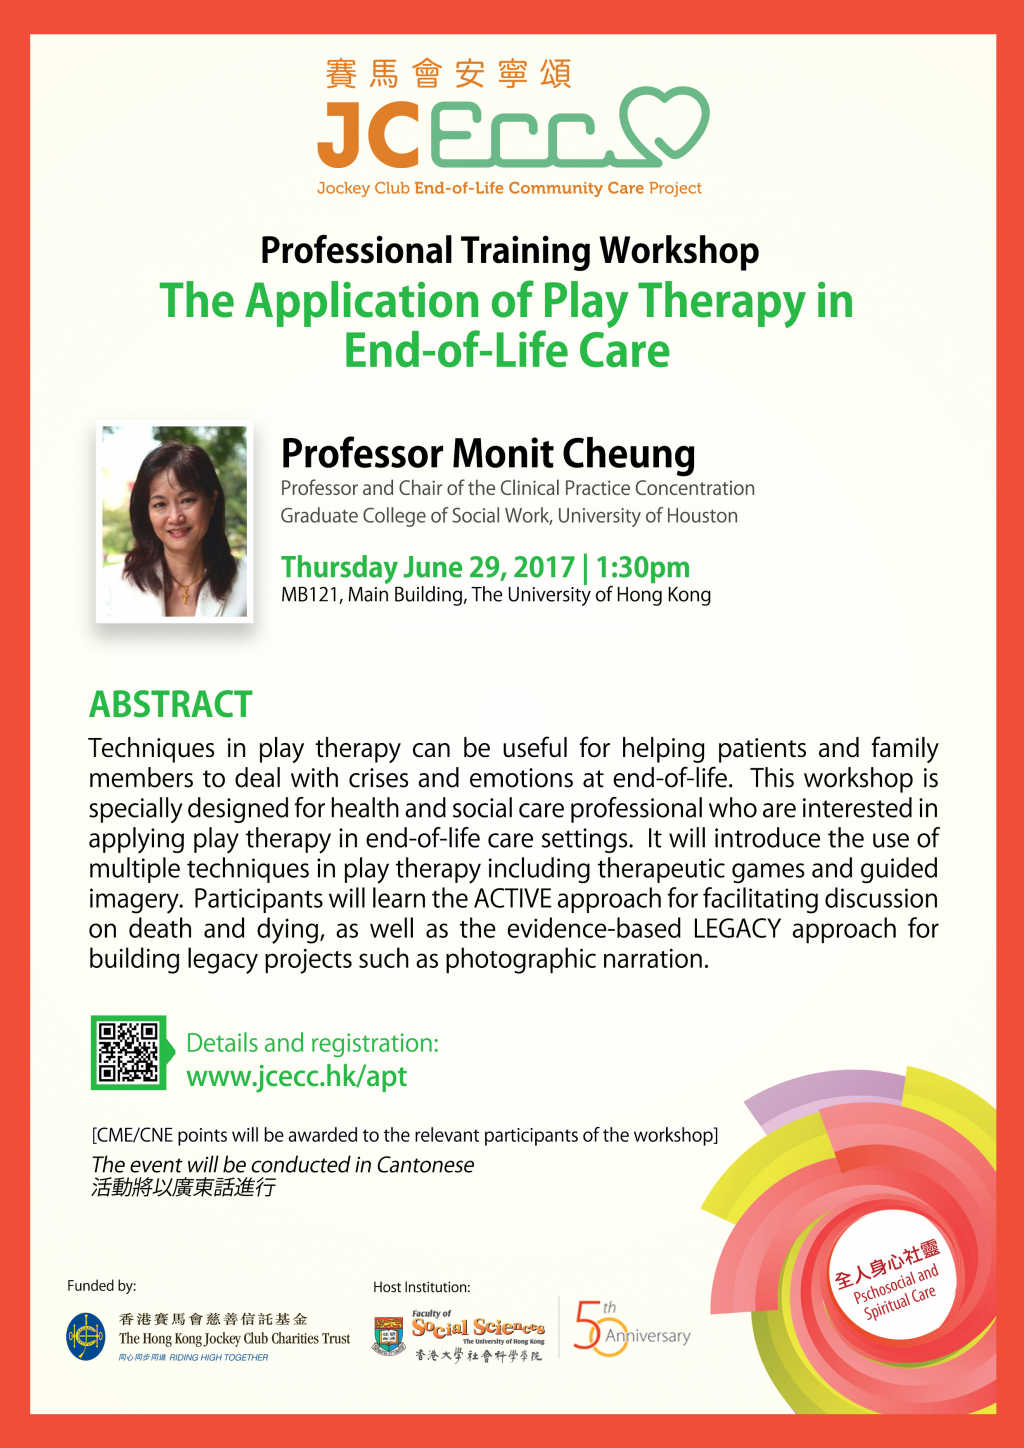 JCECC Workshop on The Application of Play Therapy in End-of-Life Care